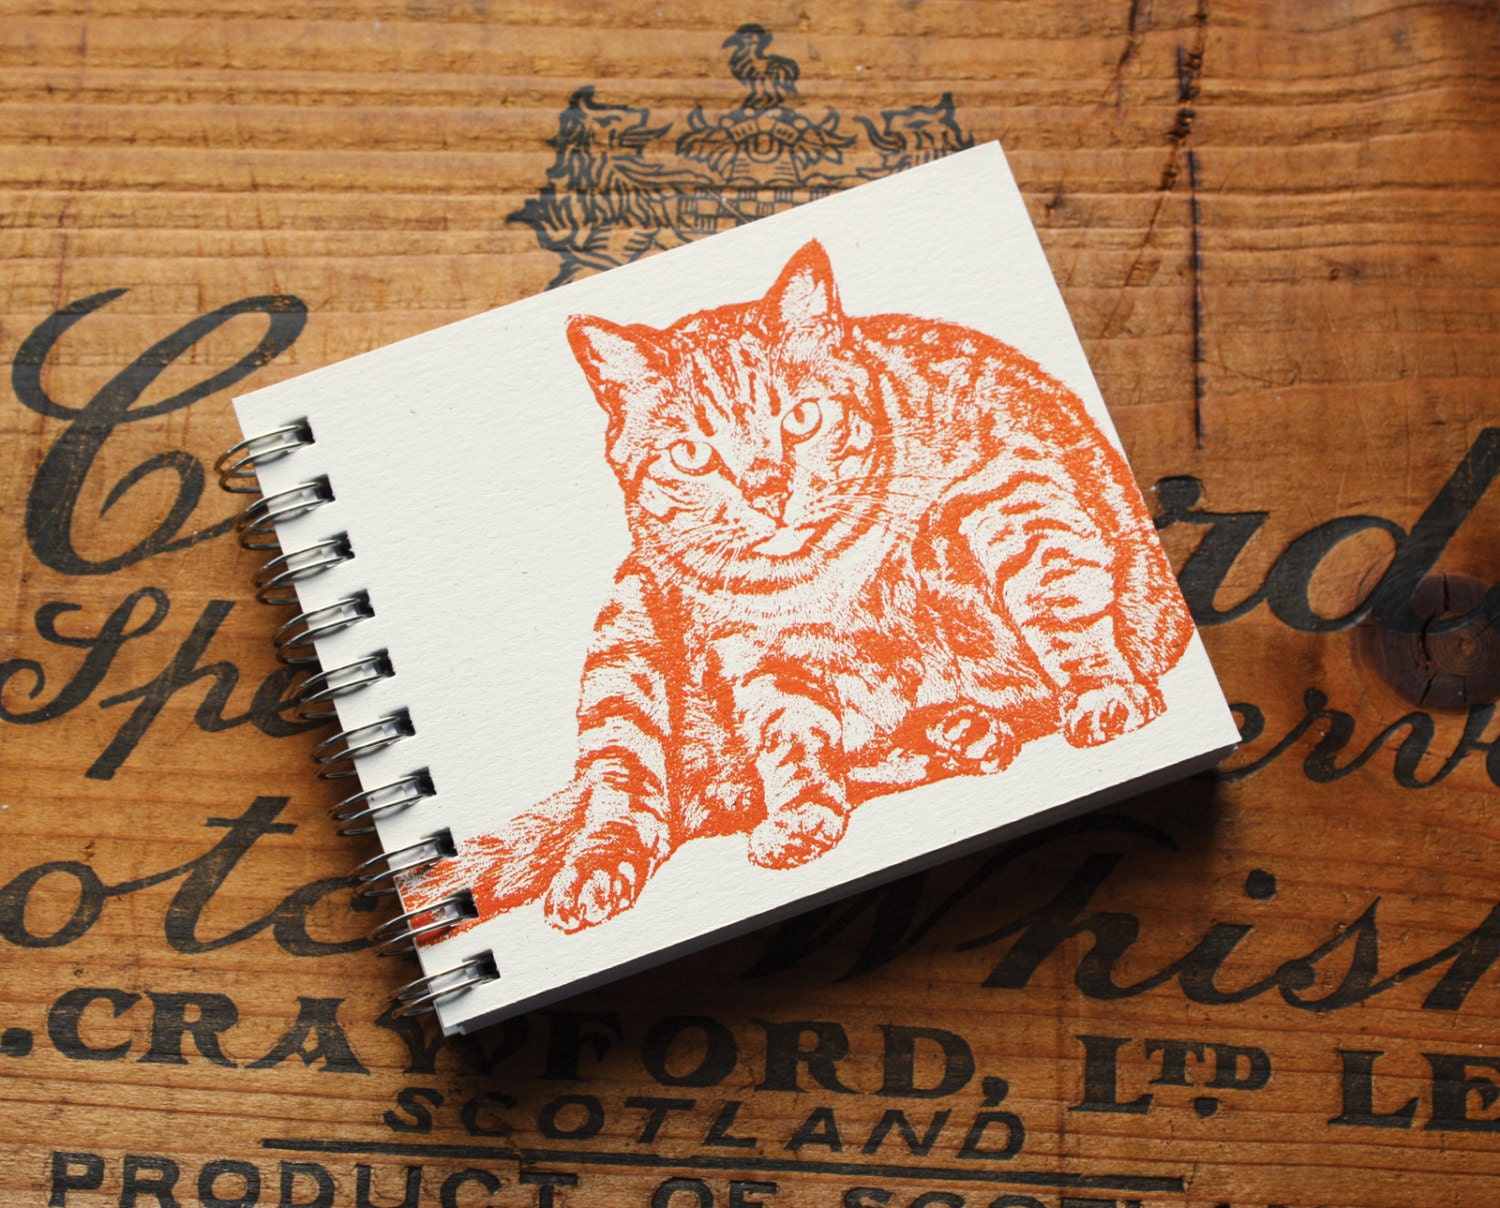 Cat Mini Journal, Animal Mini Notebook, Cat Notebook, Diary, Gift For Her